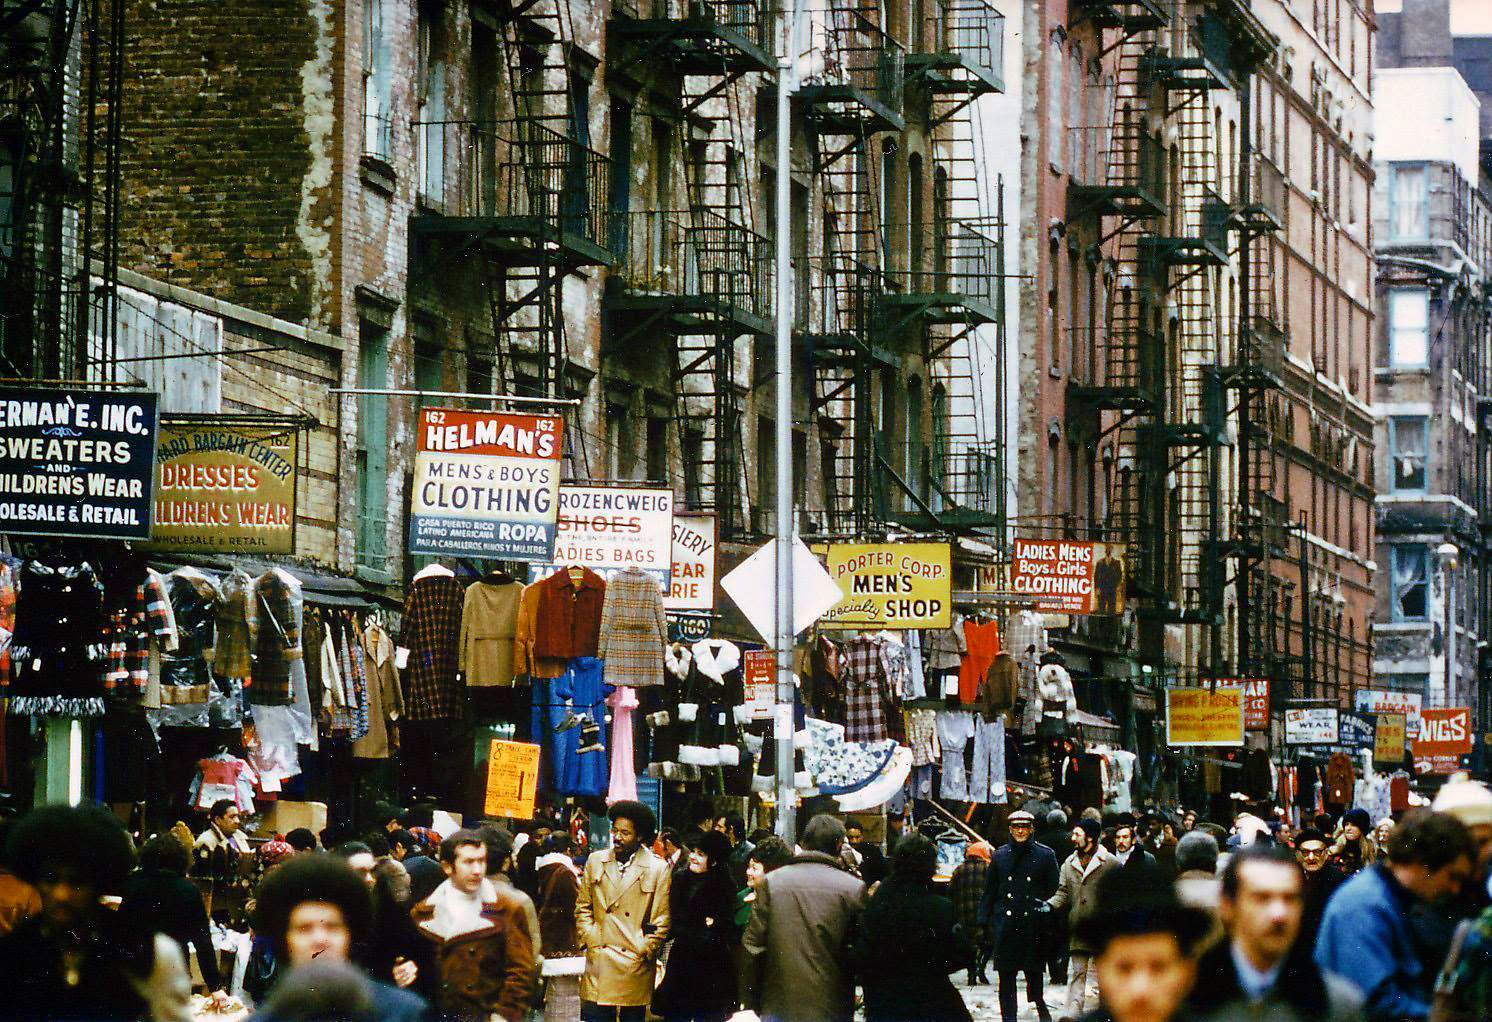 Orchard Street between Stanton and Rivington, facing South, mid ’70s